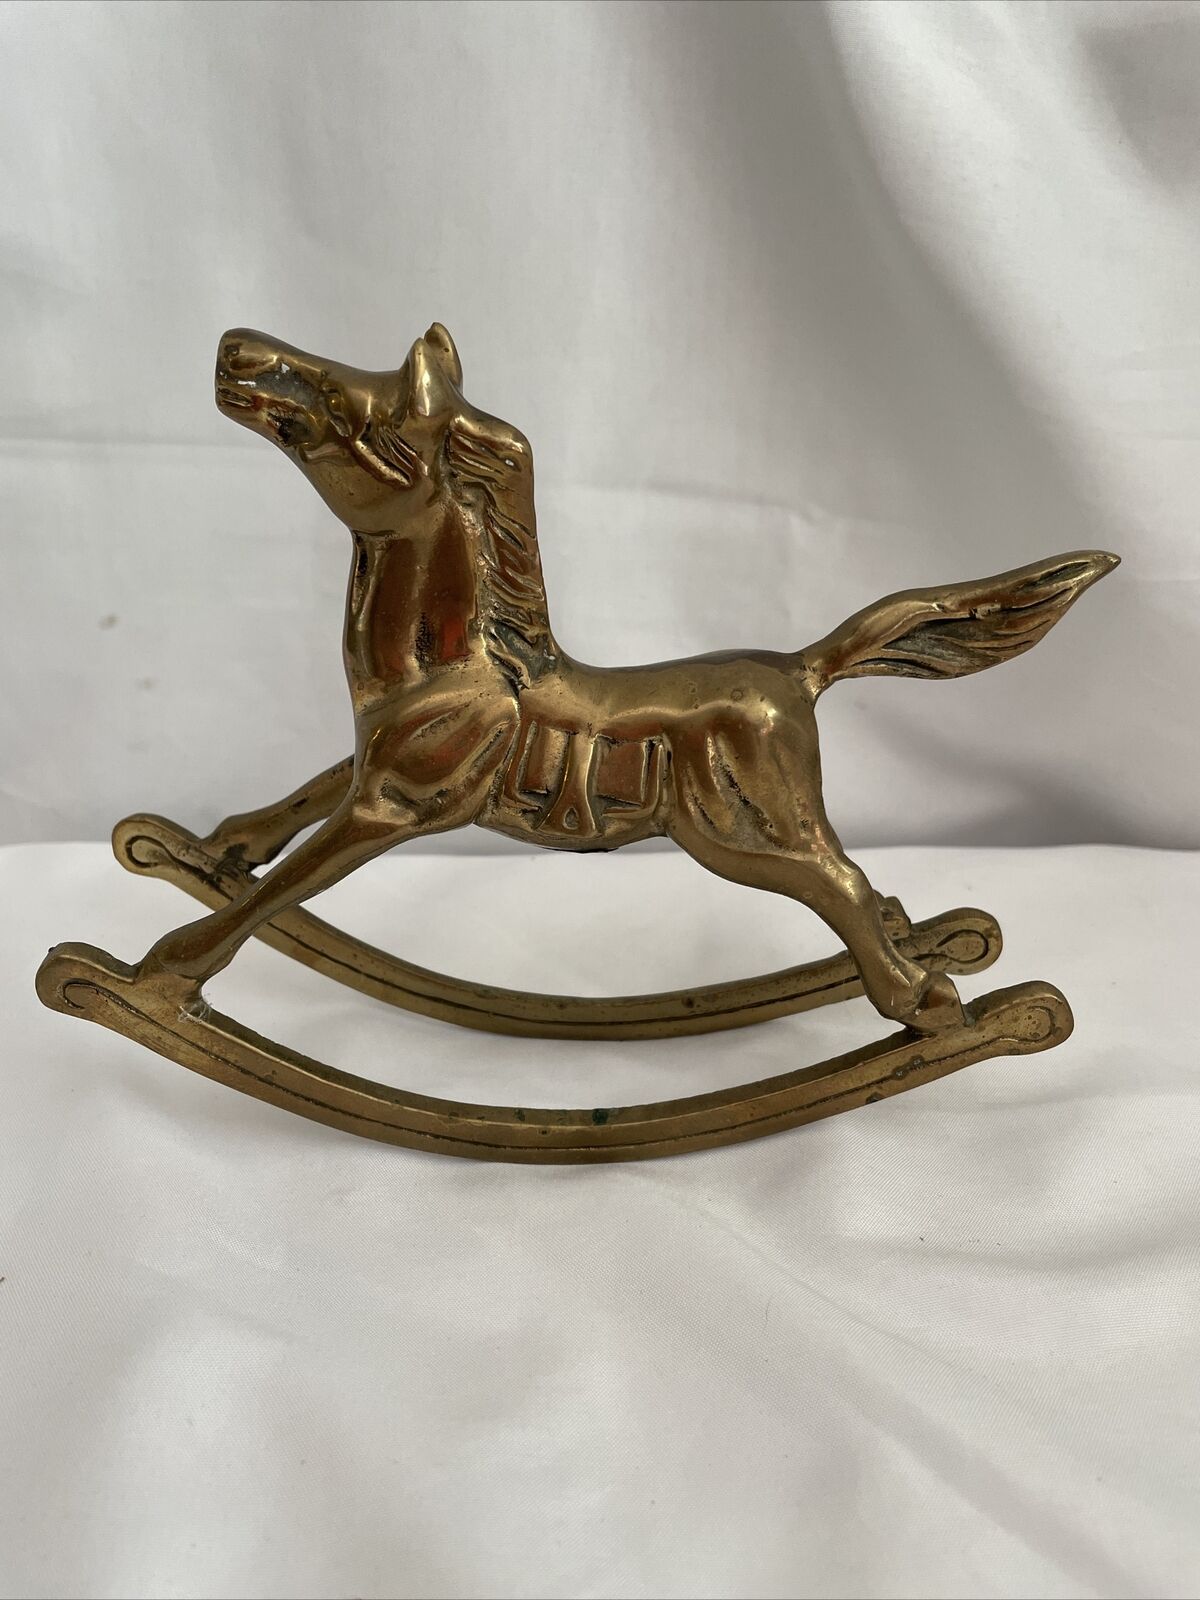 Vintage Collectible Heavy Solid Brass 7” Rocking Horse Pony Statue Figurine